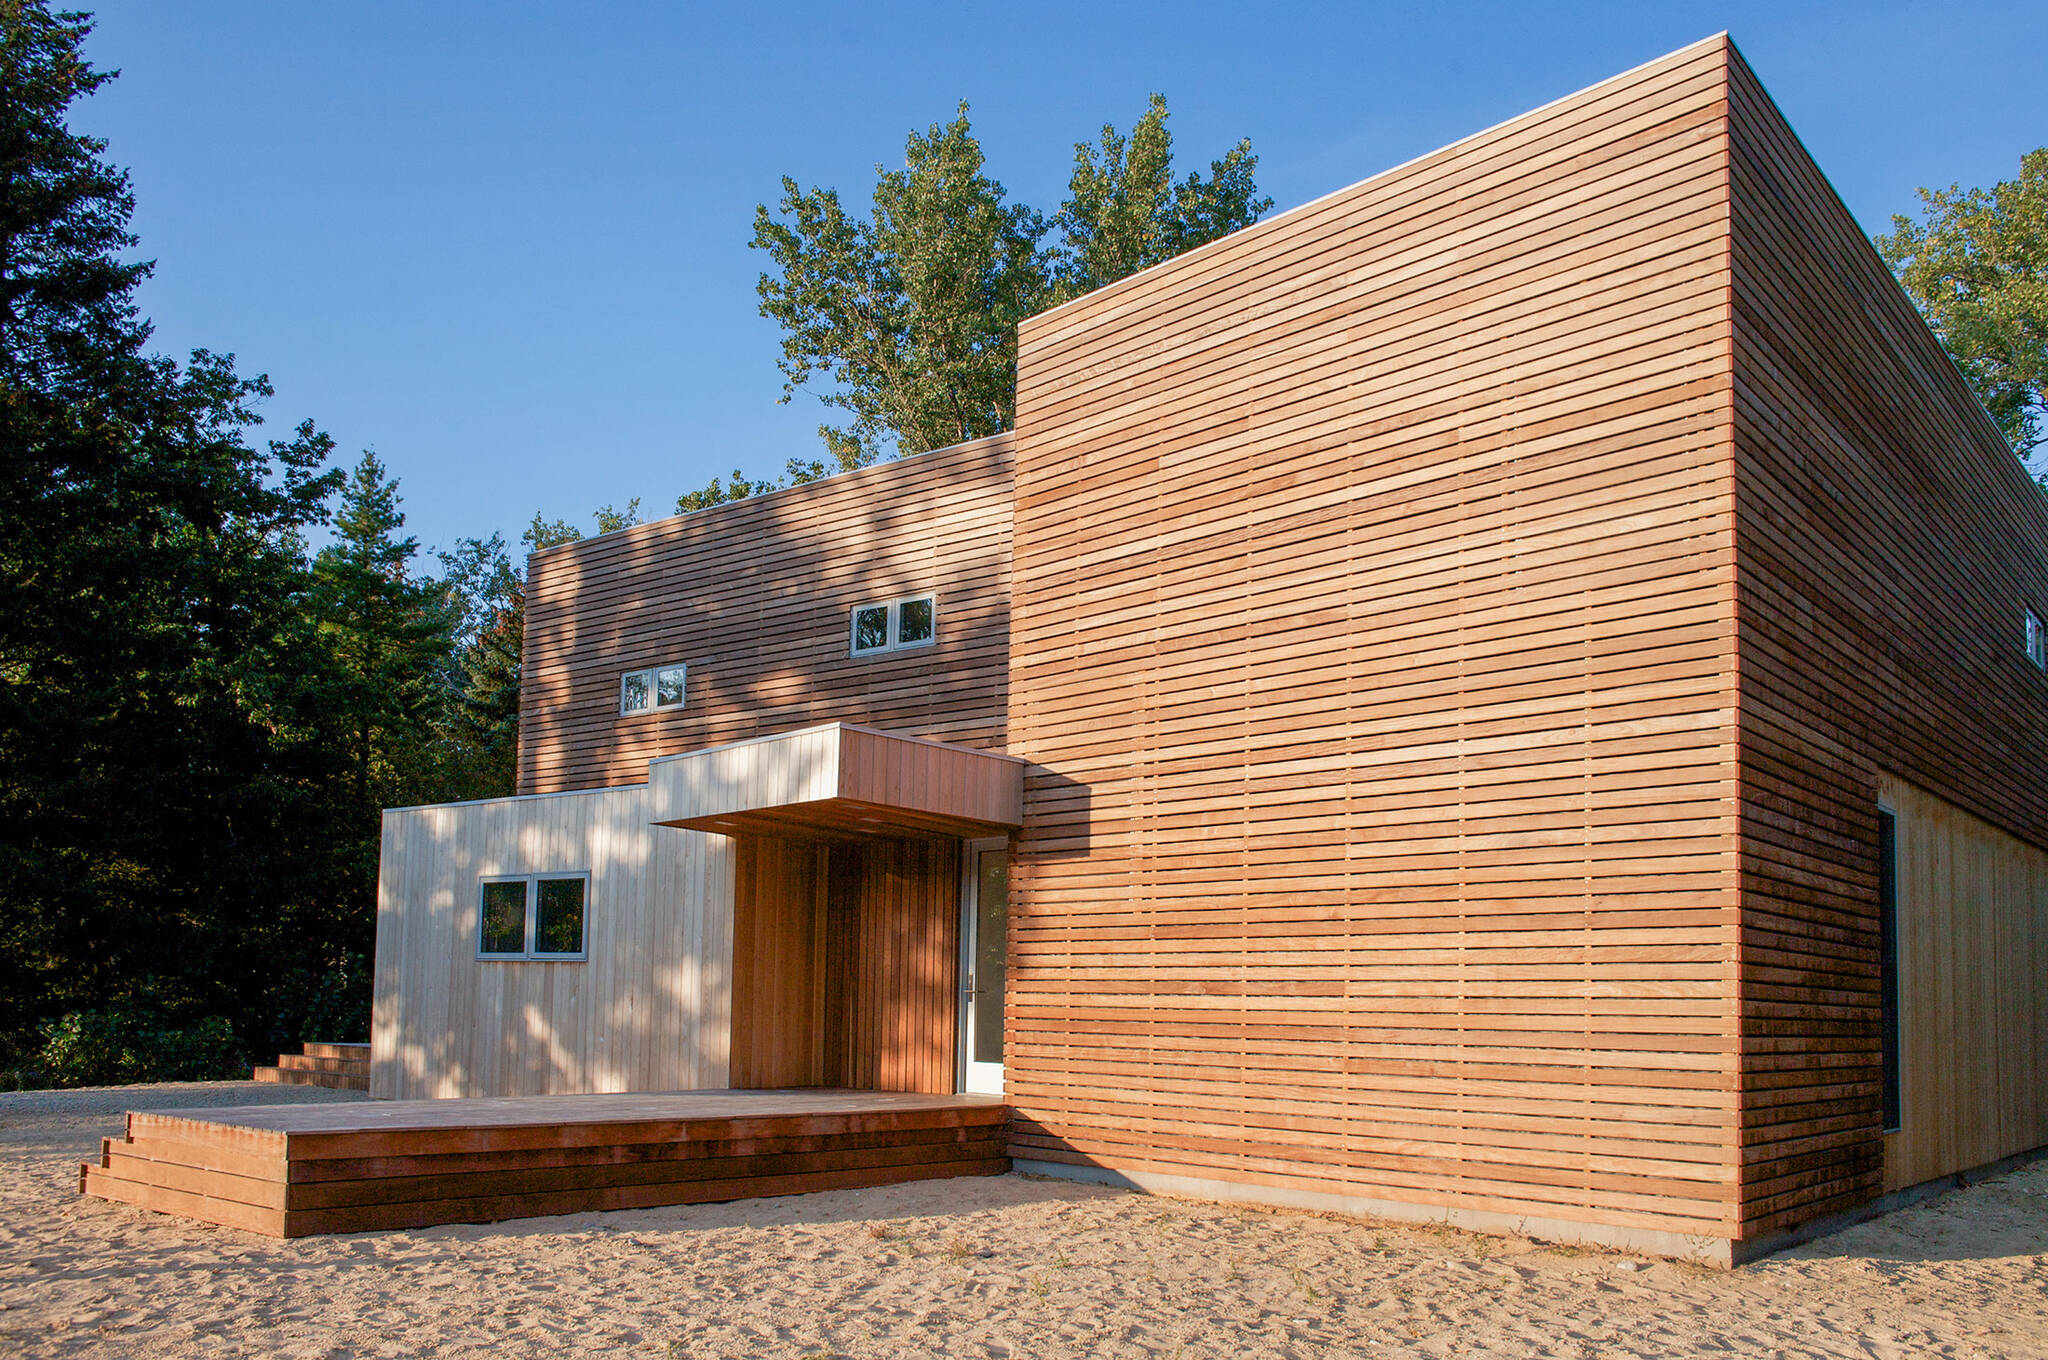 Wooden cladding facade of the sustainable lake house project in Omena, Michigan designed by the architecture studio Danny Forster & Architecture